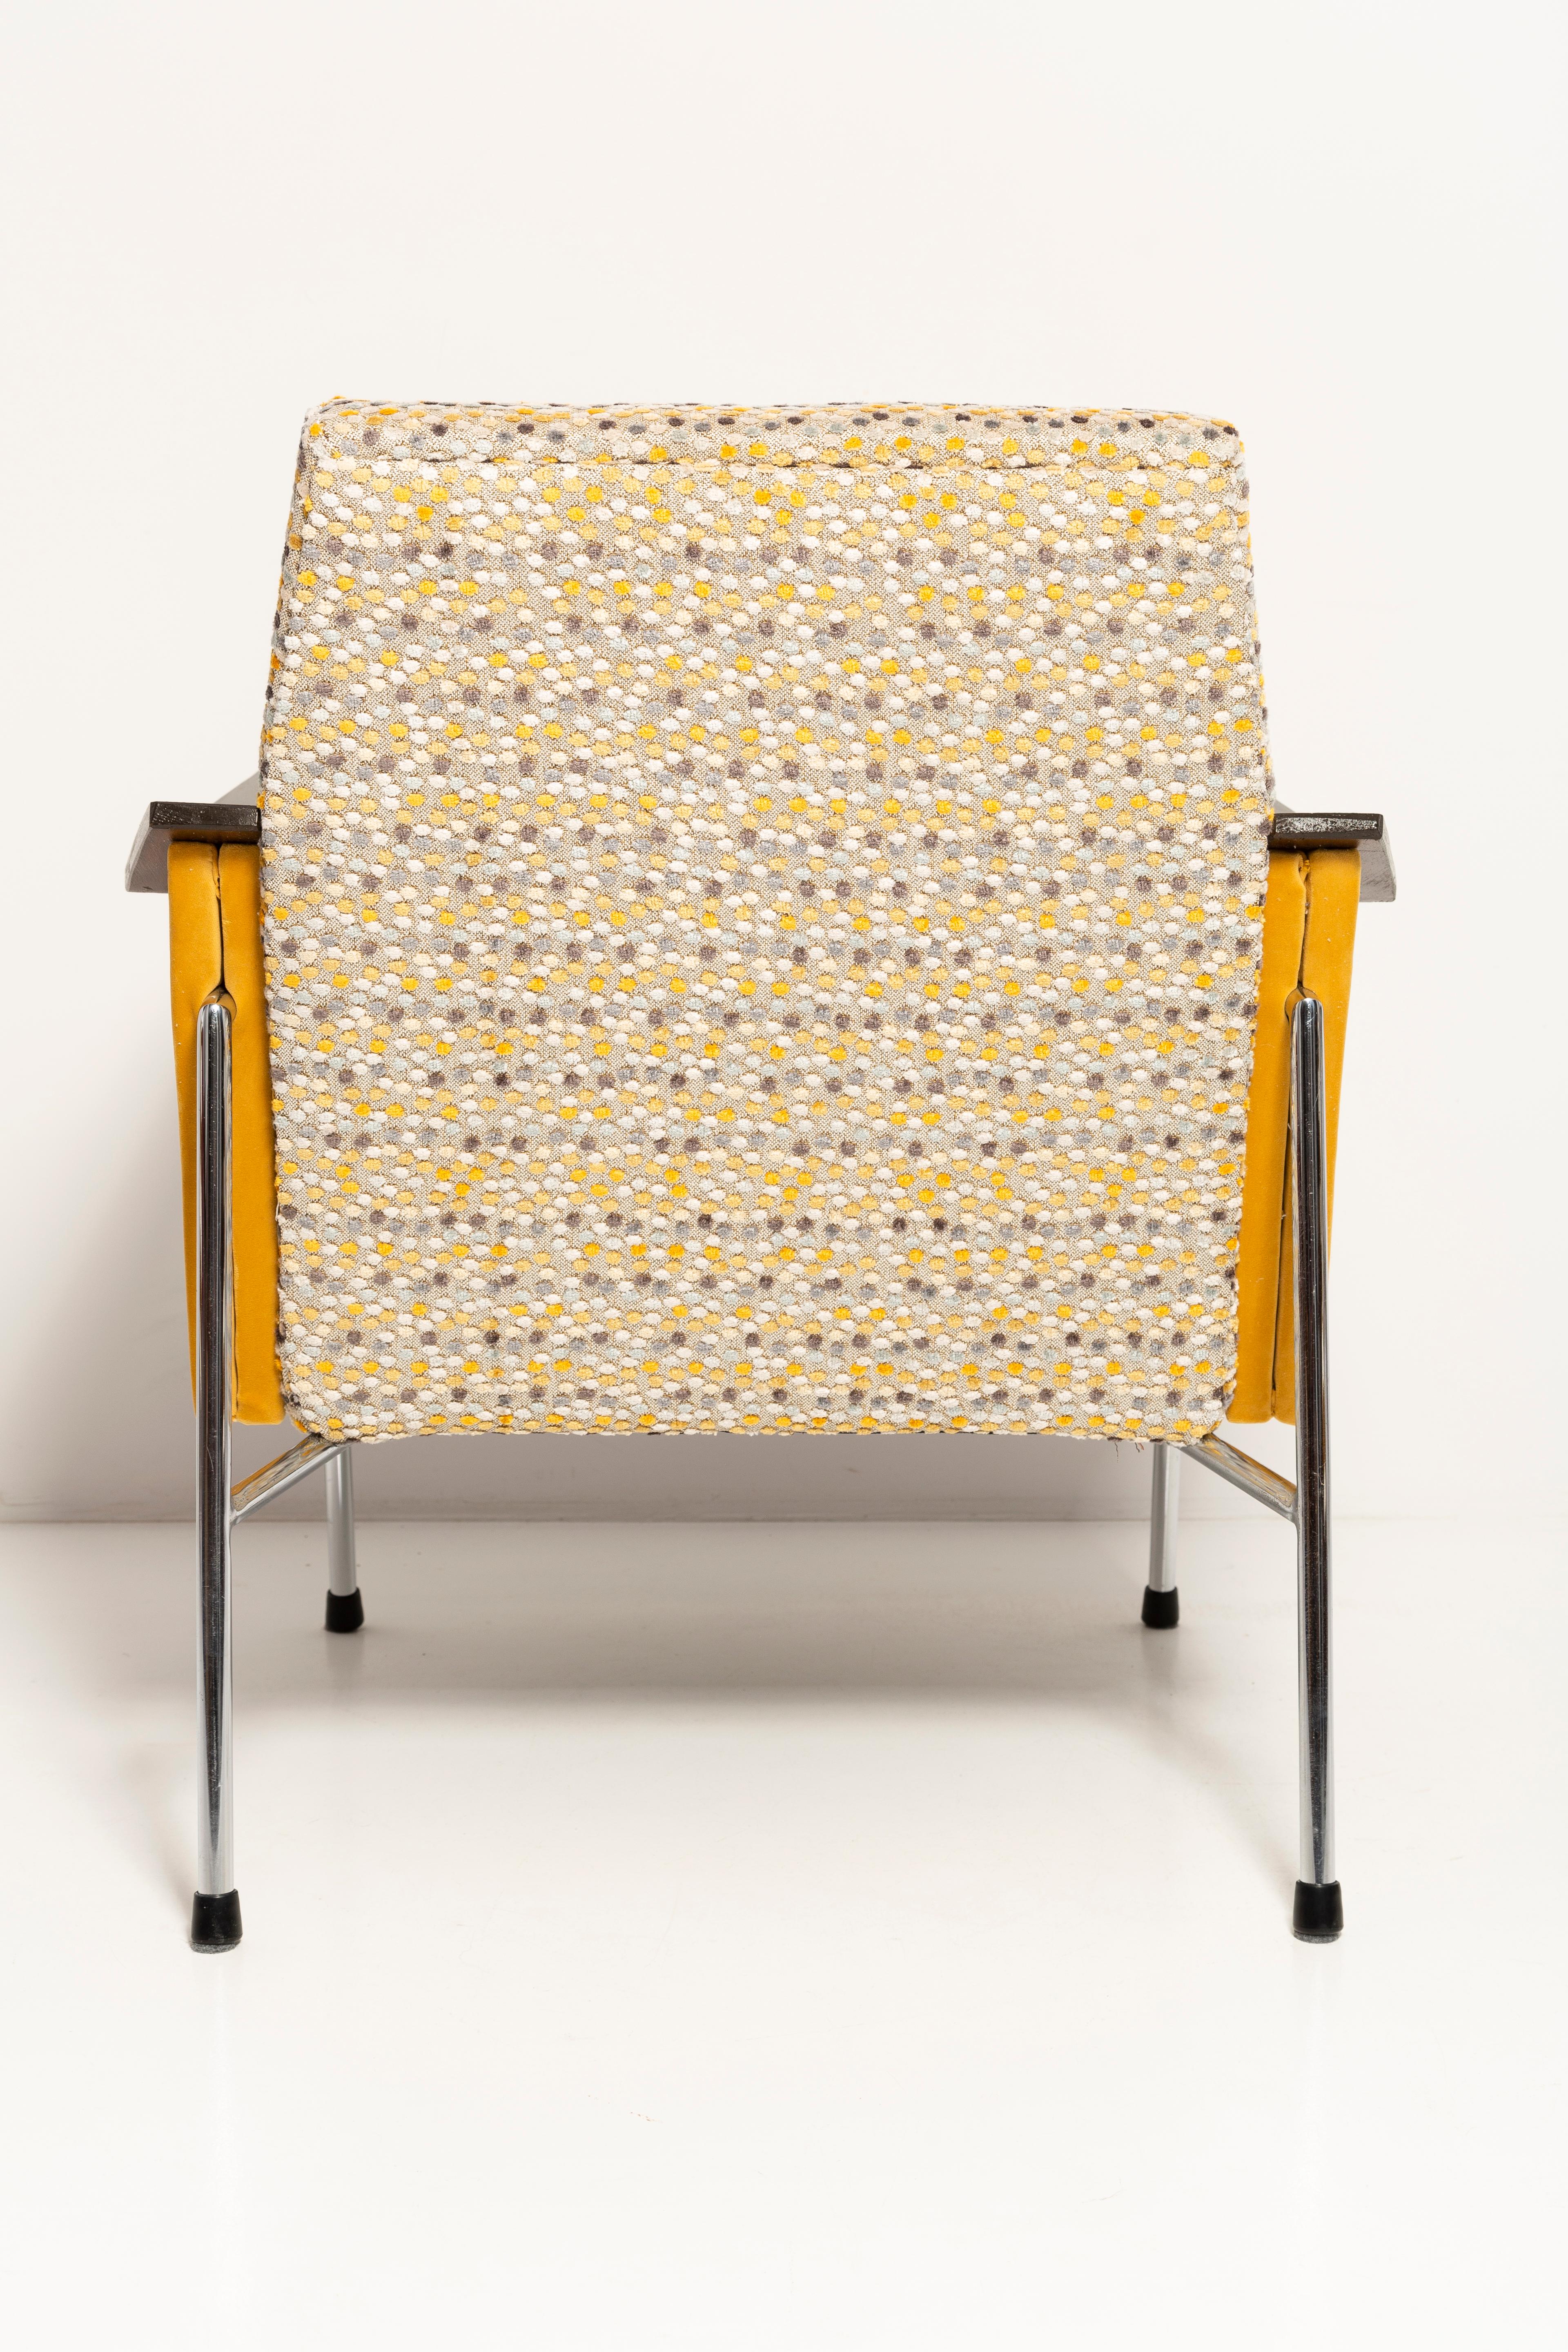 Pair of Mid Century Bat Armchairs, Yellow Dots, Bauhaus Style, Poland, 1970s. For Sale 5